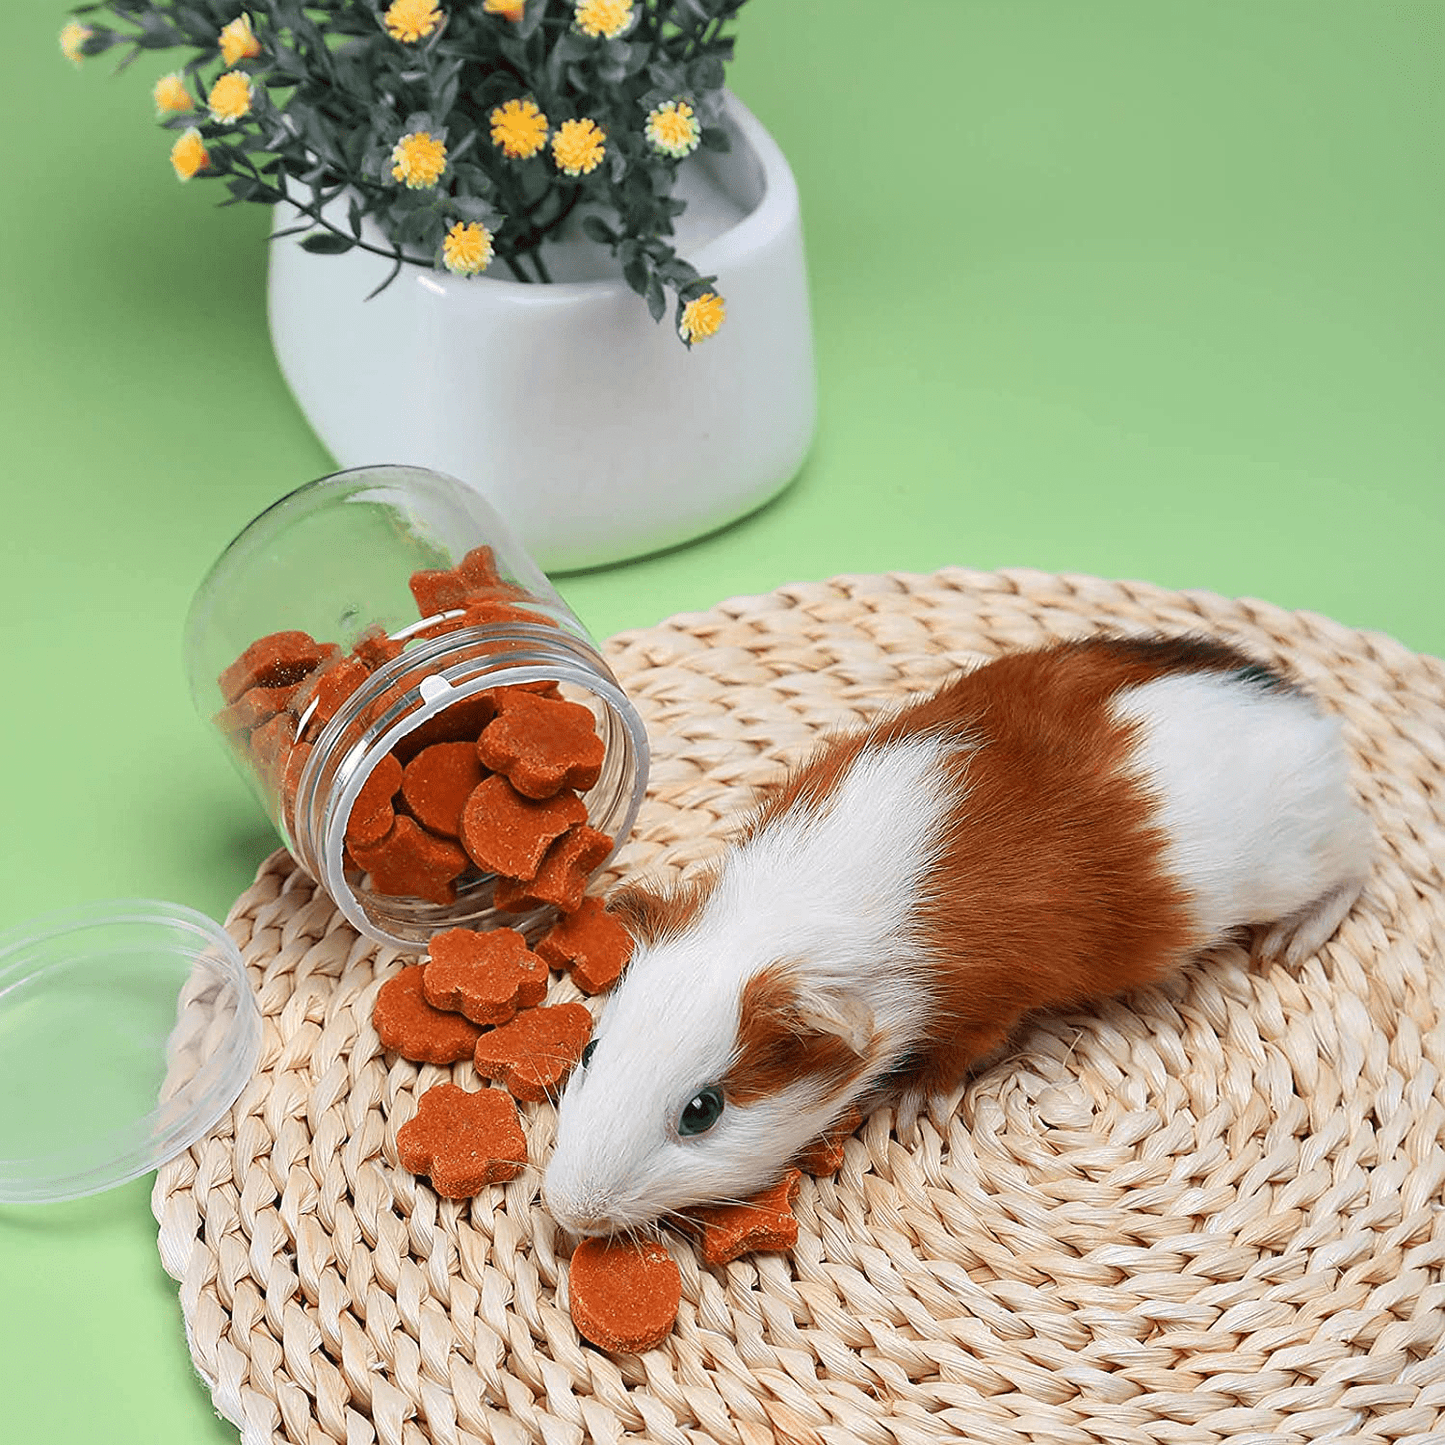 X-Pet Rabbit Chew Toys, Guinea Pig Treats 100% Natural Material Garden Stuff Flavored Biscuit&Grass Cake, Small Animals Teeth Grinding Chewing Suitable for Bunny Hamster Chinchilla Dwarf Gerbils Animals & Pet Supplies > Pet Supplies > Small Animal Supplies > Small Animal Food X-pet   